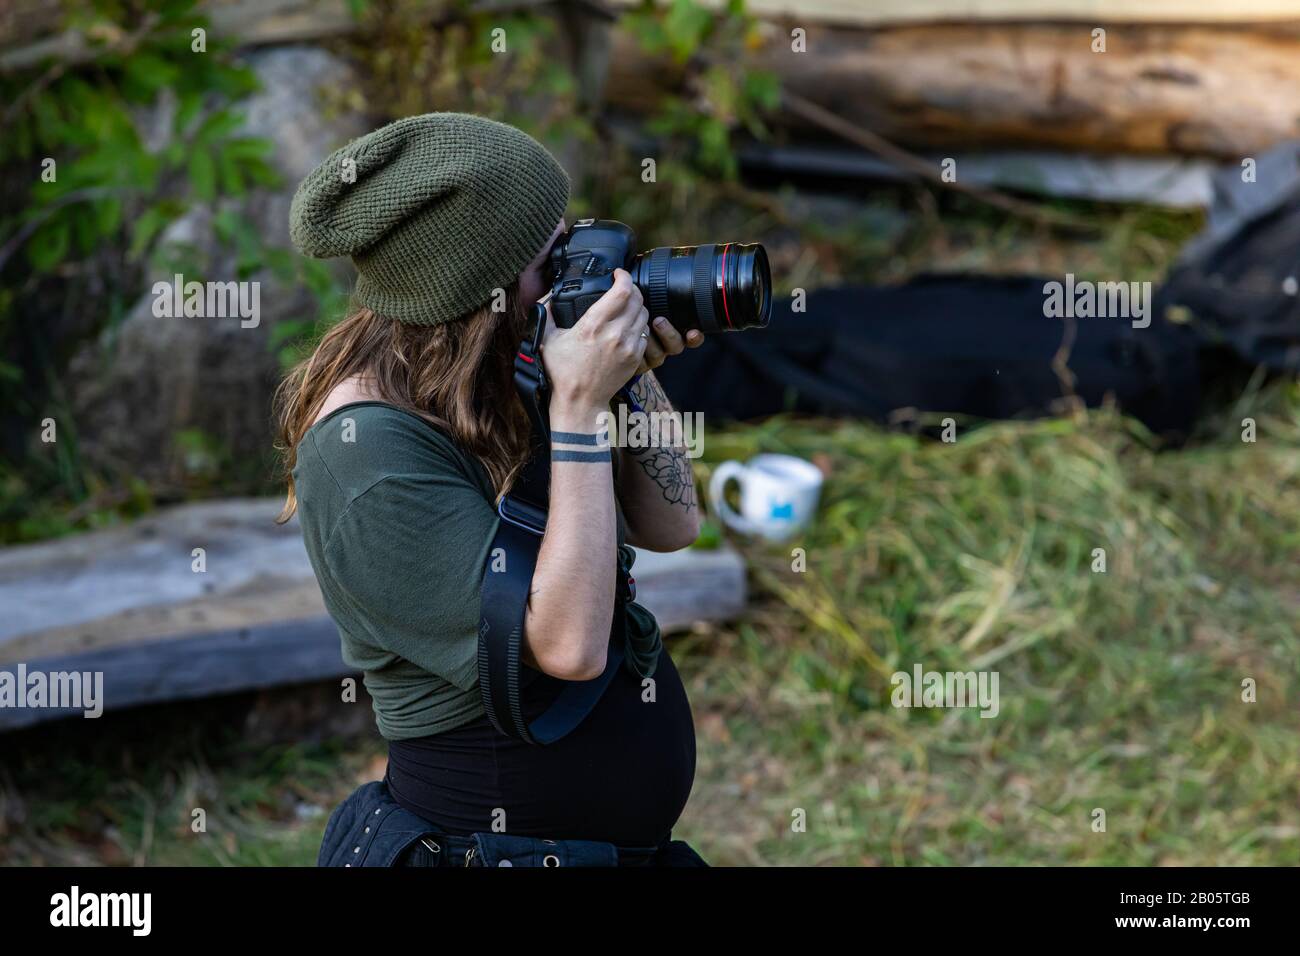 rig Sammenbrud pegs A high angle and side profile view of a professional female photographer,  with tattooed arms and wearing a green beanie hat, taking photos in nature  Stock Photo - Alamy